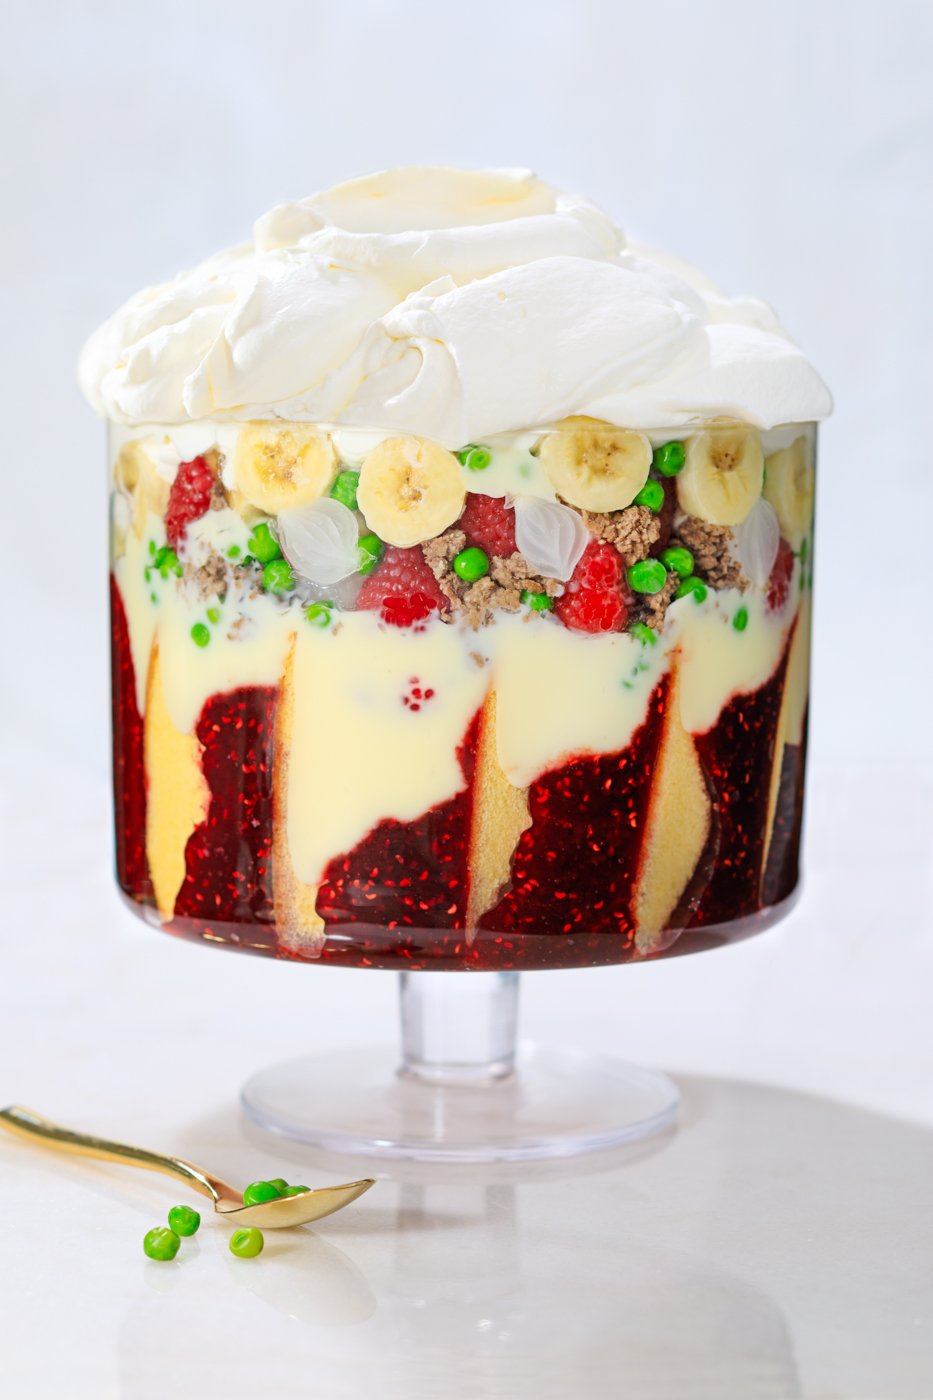 A layered trifle with cake and jam the bottom, cream and fruits in the middle, and topped with whipped cream